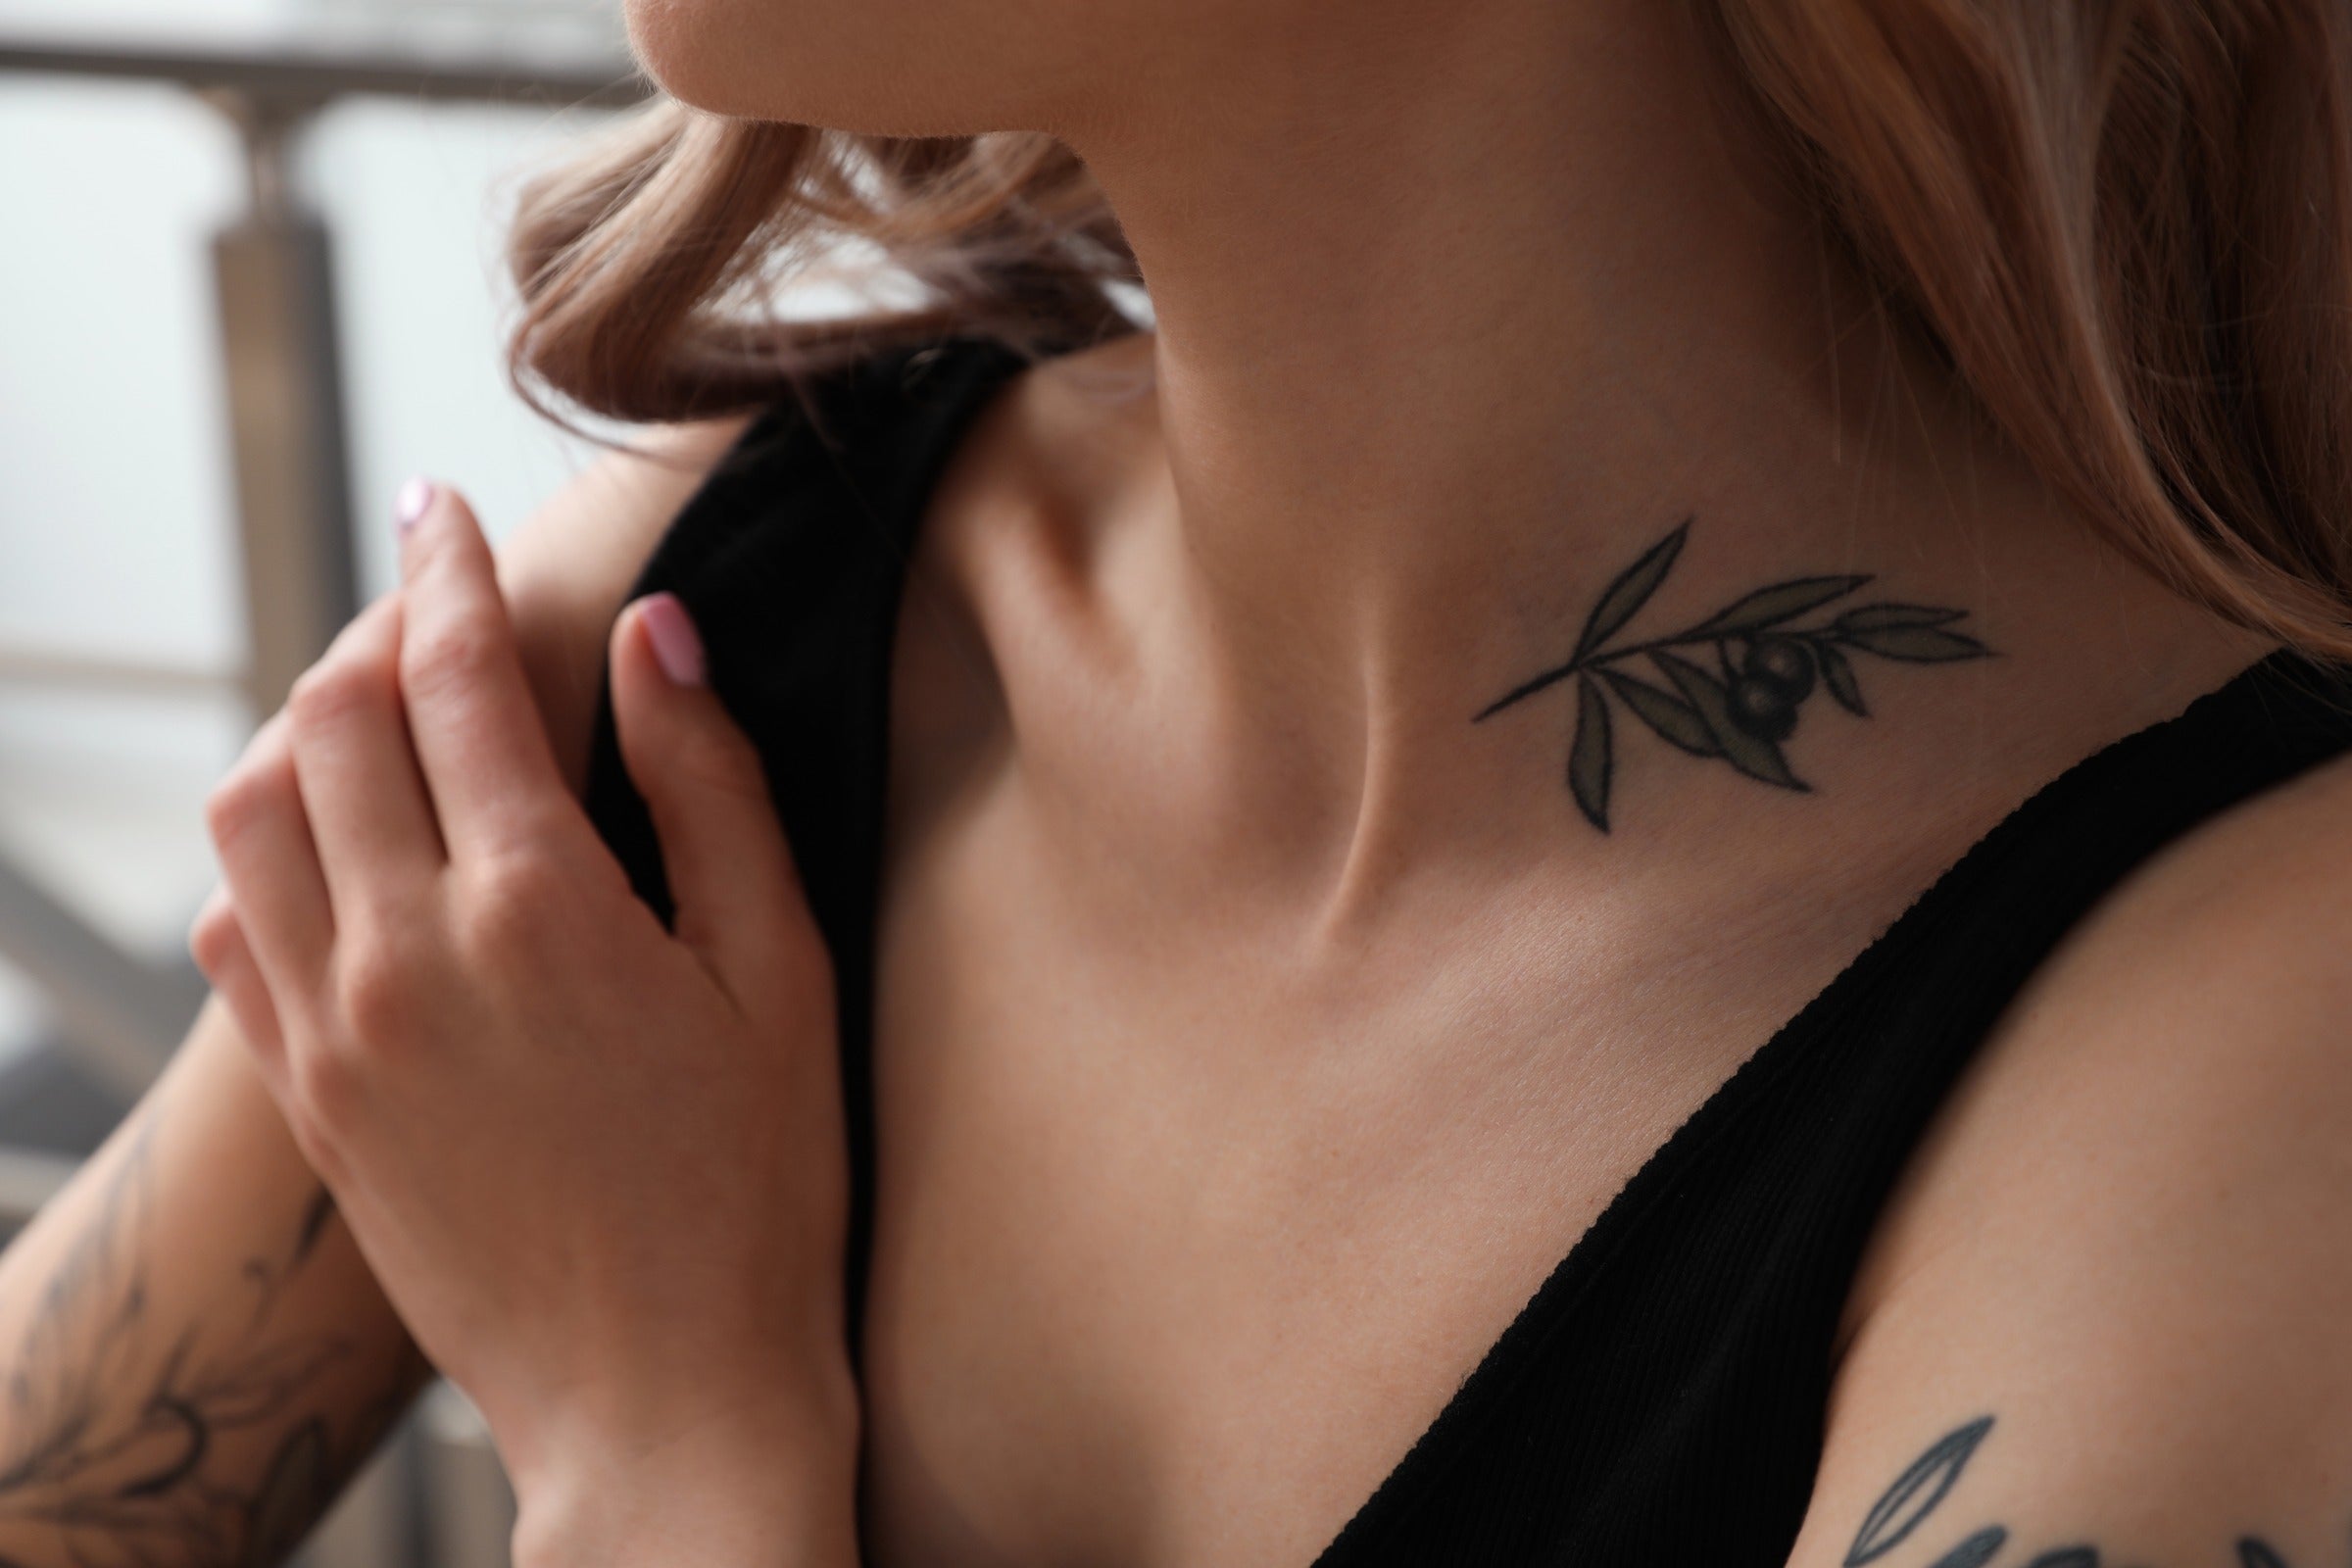 Taking a tan and getting a tattoo each carry the same risk: 4 causes